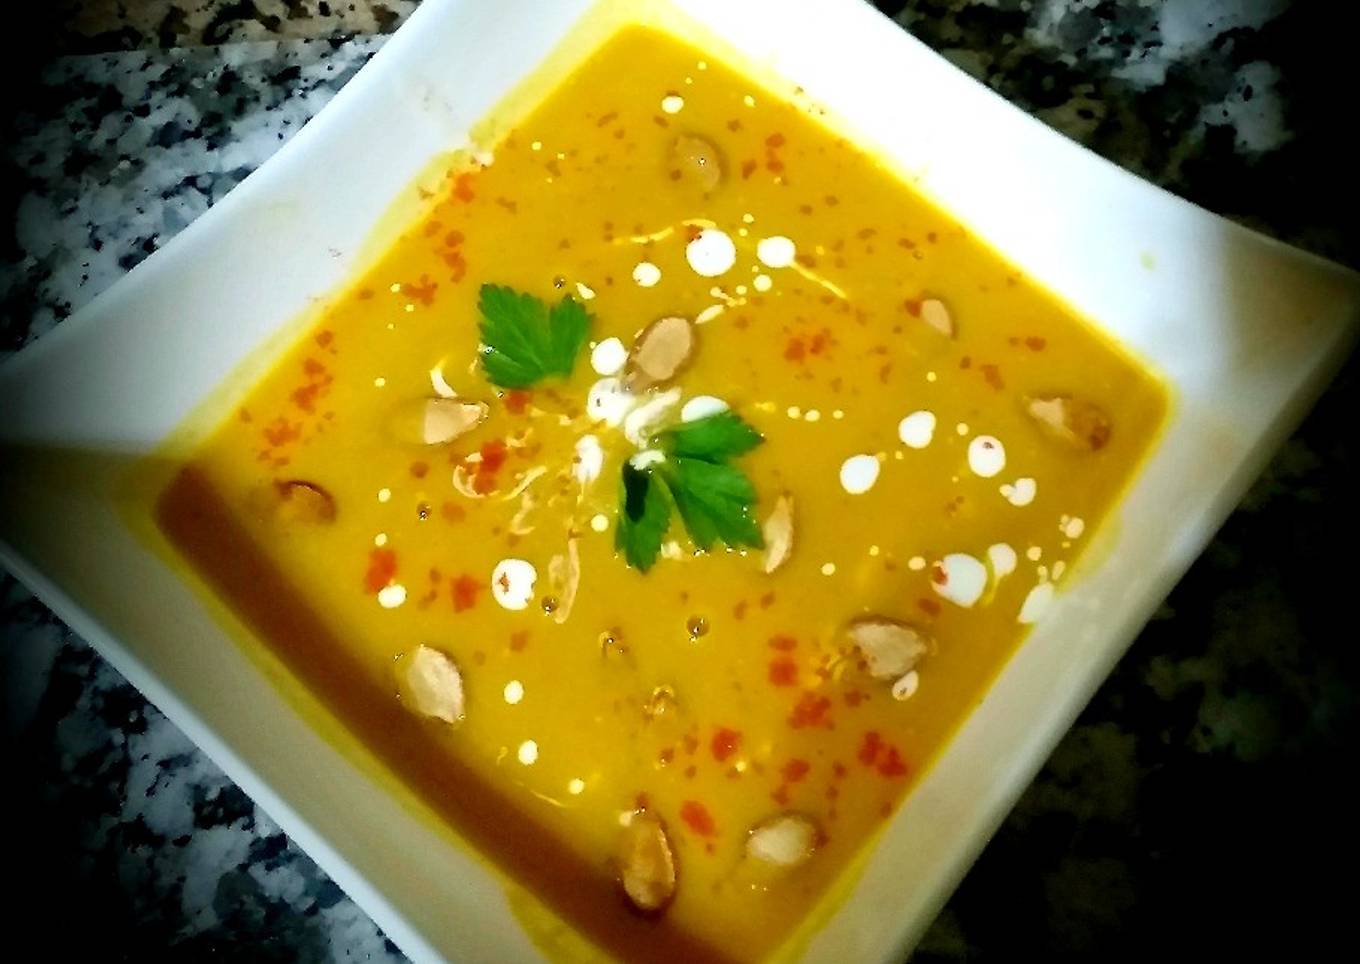 The pumpkin soup with its seeds toasted